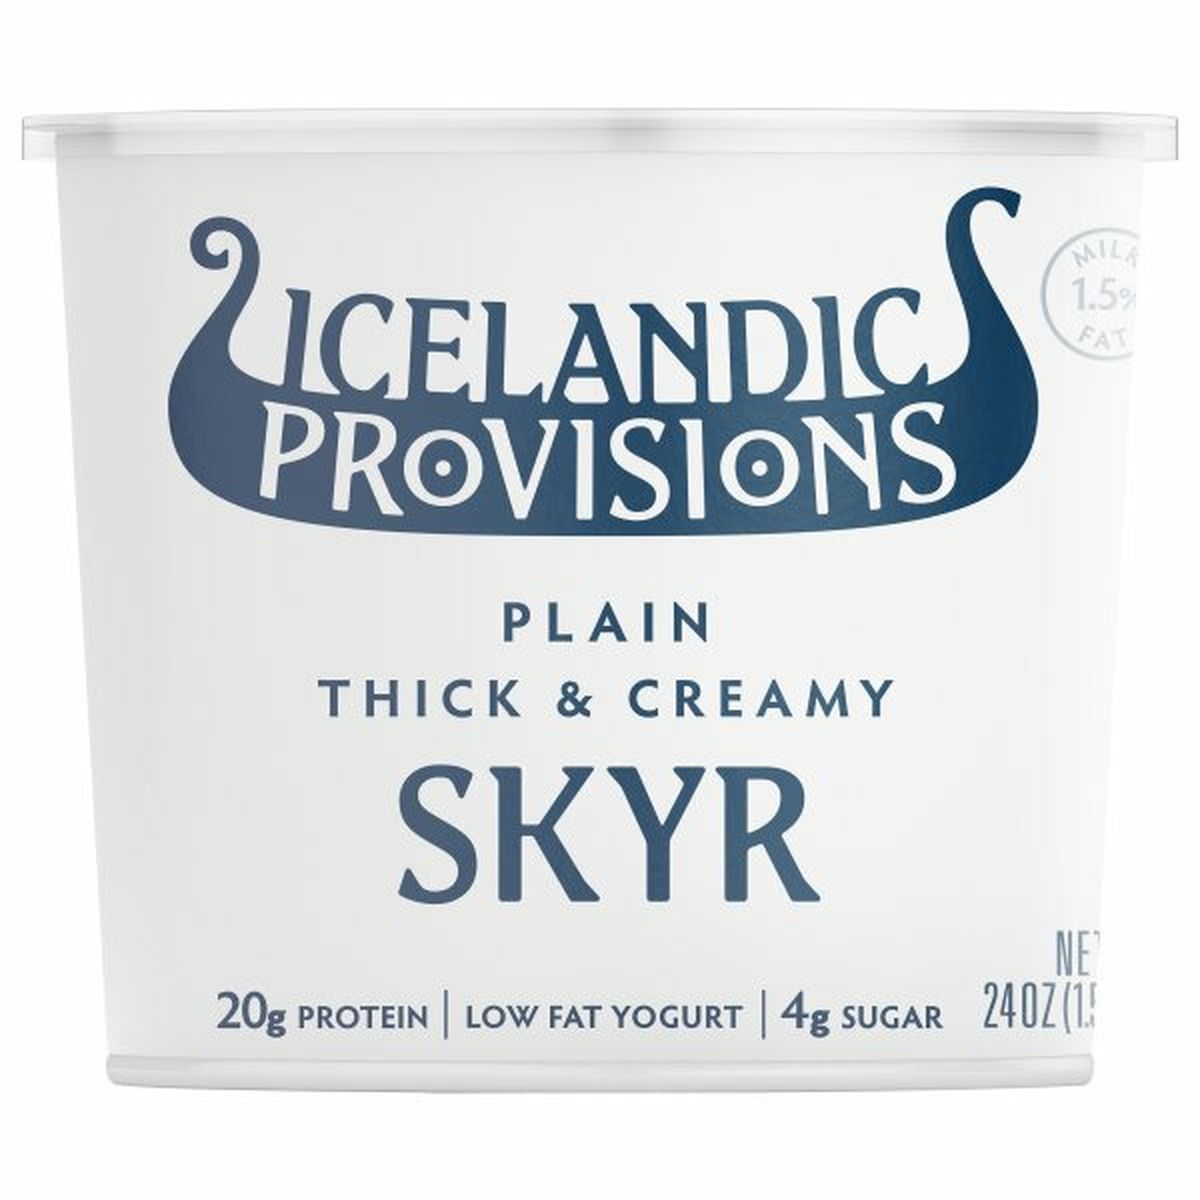 Calories in Icelandic Provisions Skyr, Low Fat, Plain, Thick & Creamy